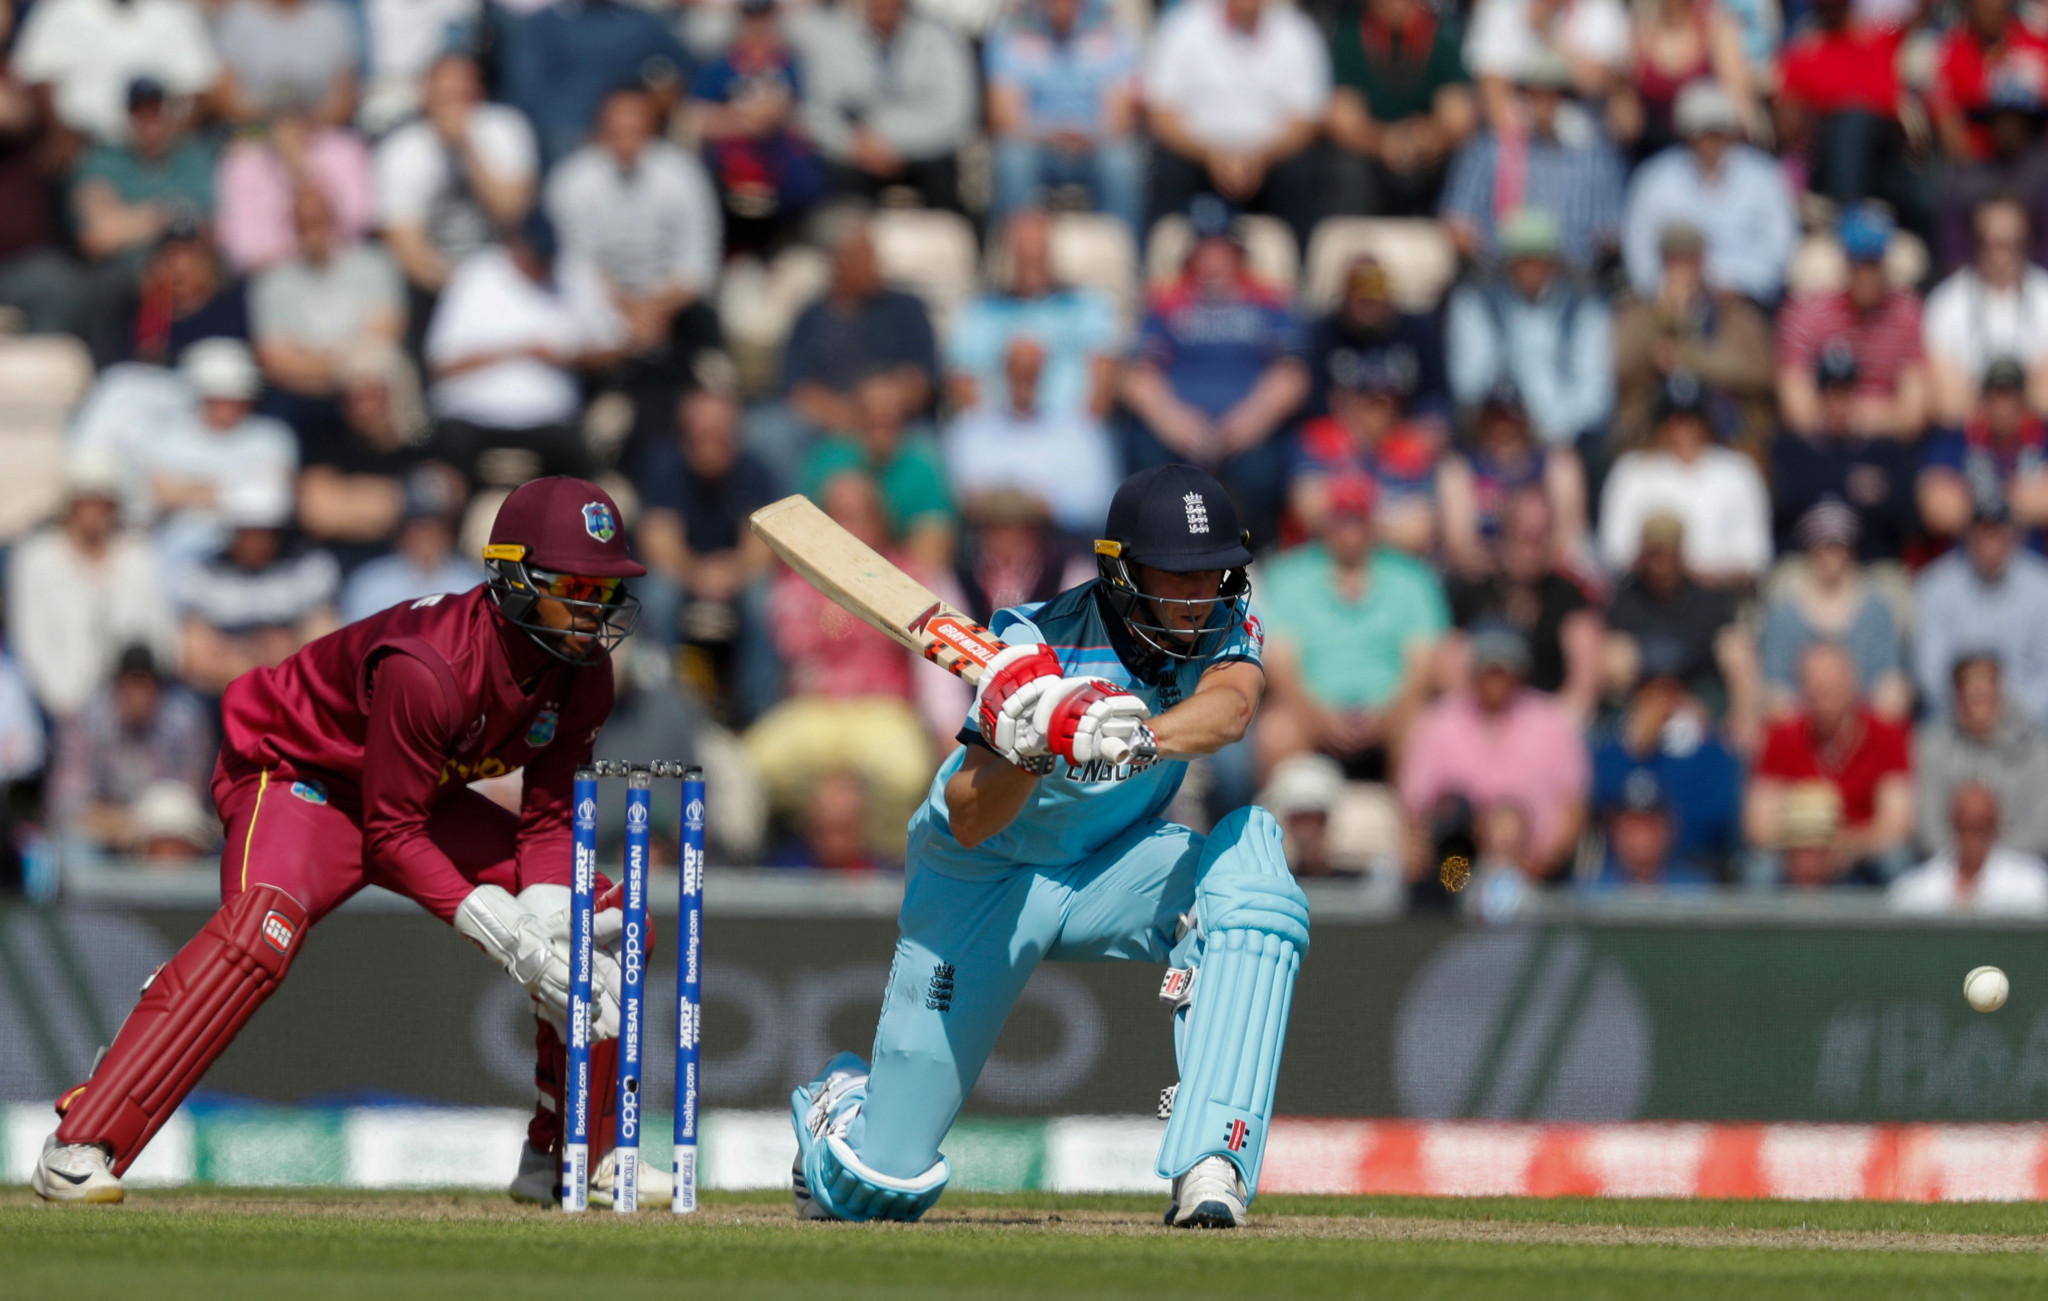 England easily chased down their target as they won with 16.5 overs to spare ©Getty Images